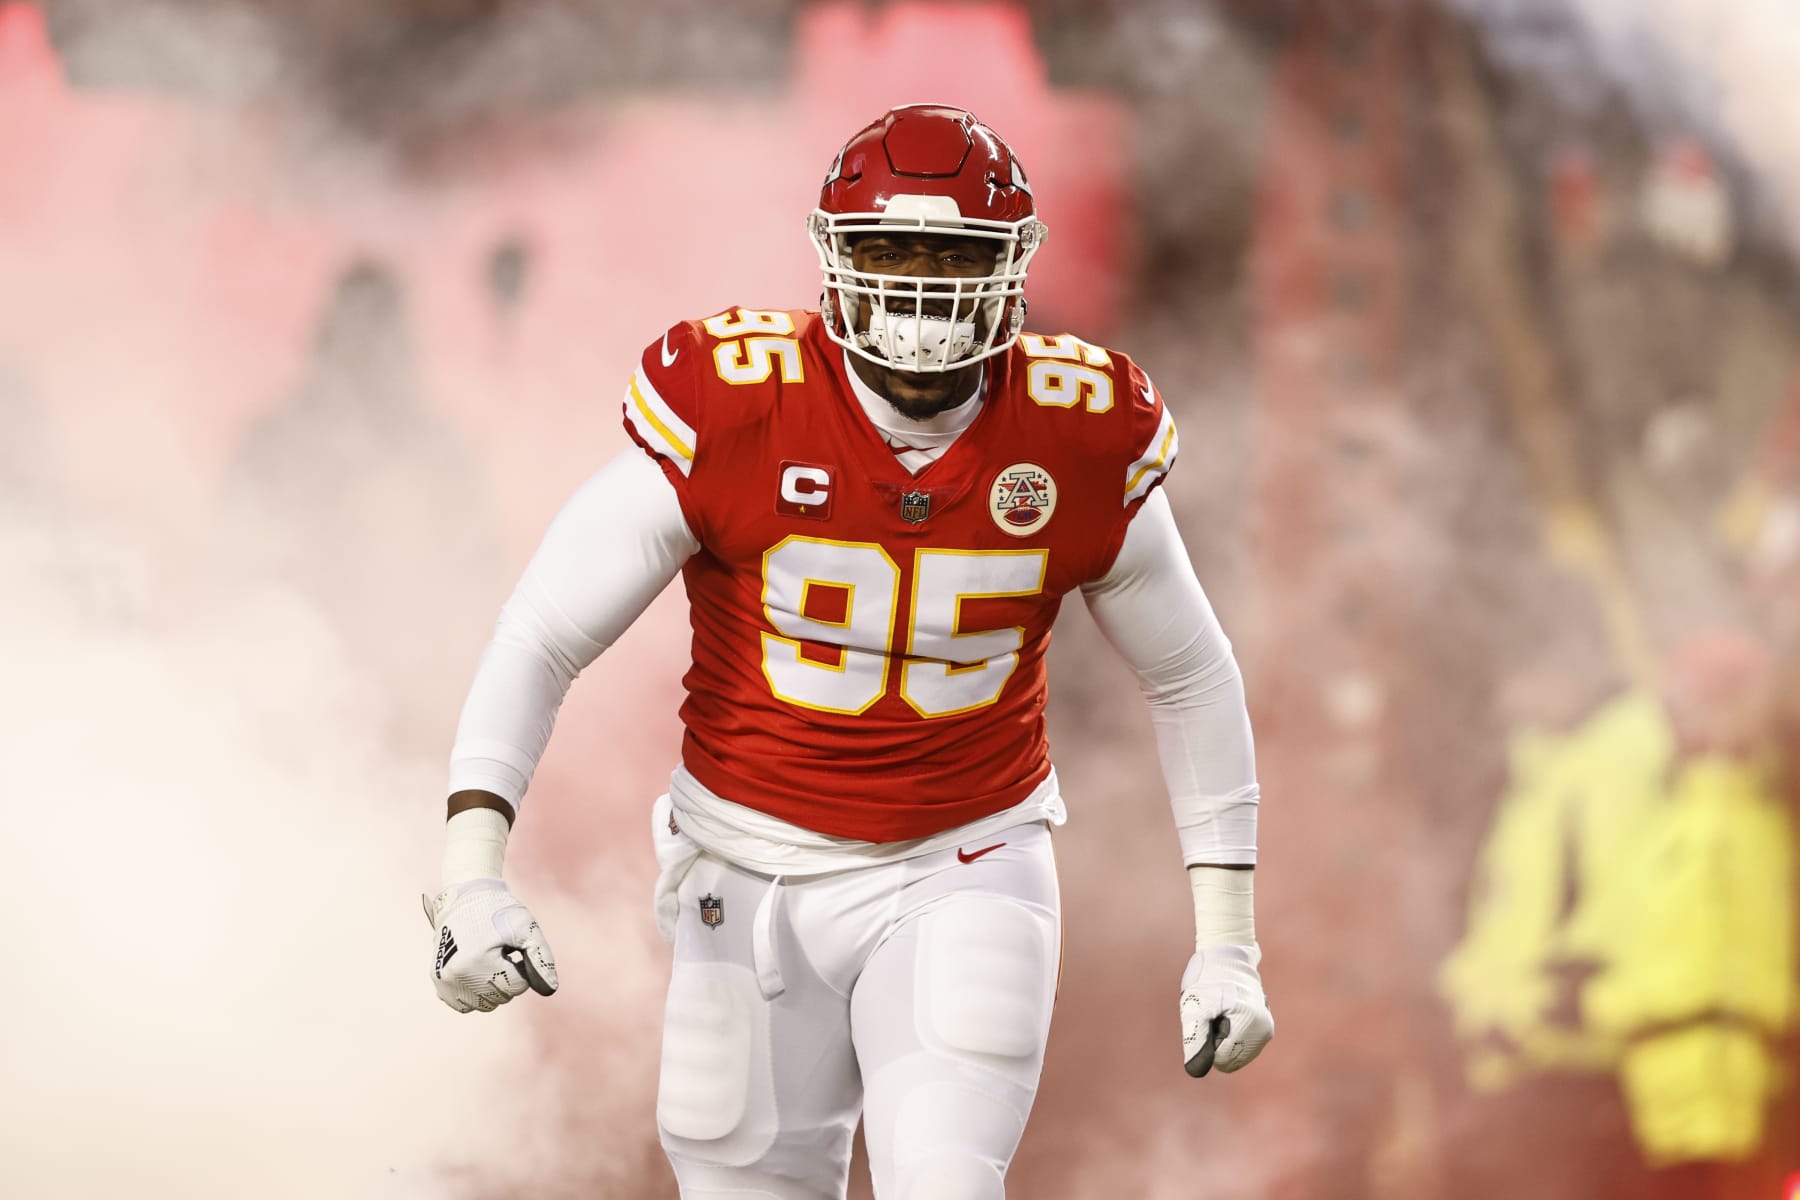 Cory's Corner: The Chiefs Proved It